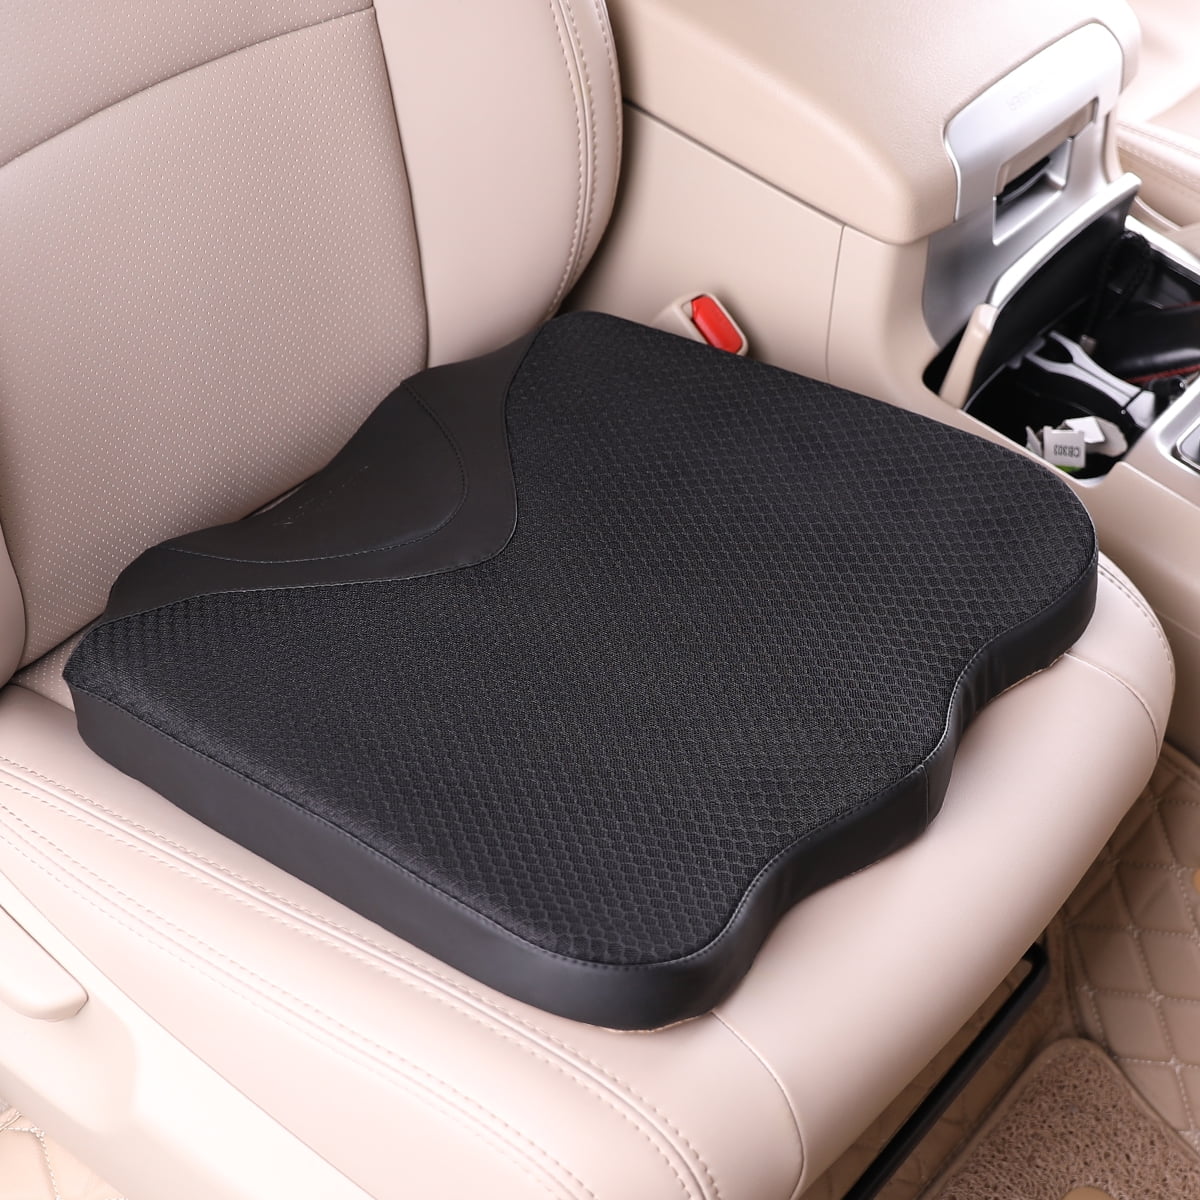 Car Seat Cushion for and Truck Driver 1 Count (Pack of 1), Black